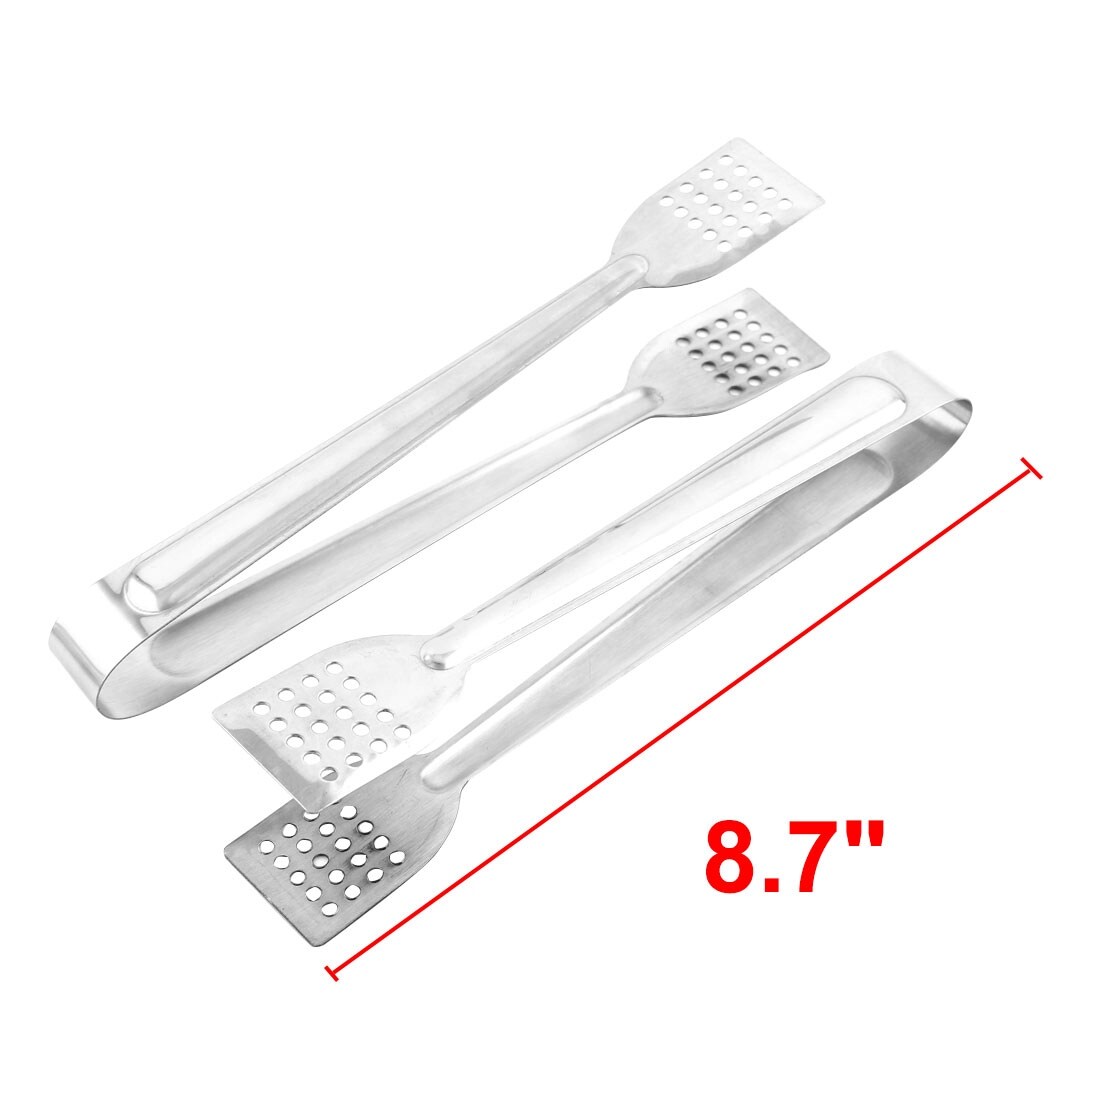 https://ak1.ostkcdn.com/images/products/is/images/direct/991c15a68f339c63db4bd46ba1e05f75dead0edf/Barbecue-Party-Buffet-Stainless-Steel-Food-Serving-Tong-Silver-Tone-22cm-Long-2-PCS.jpg